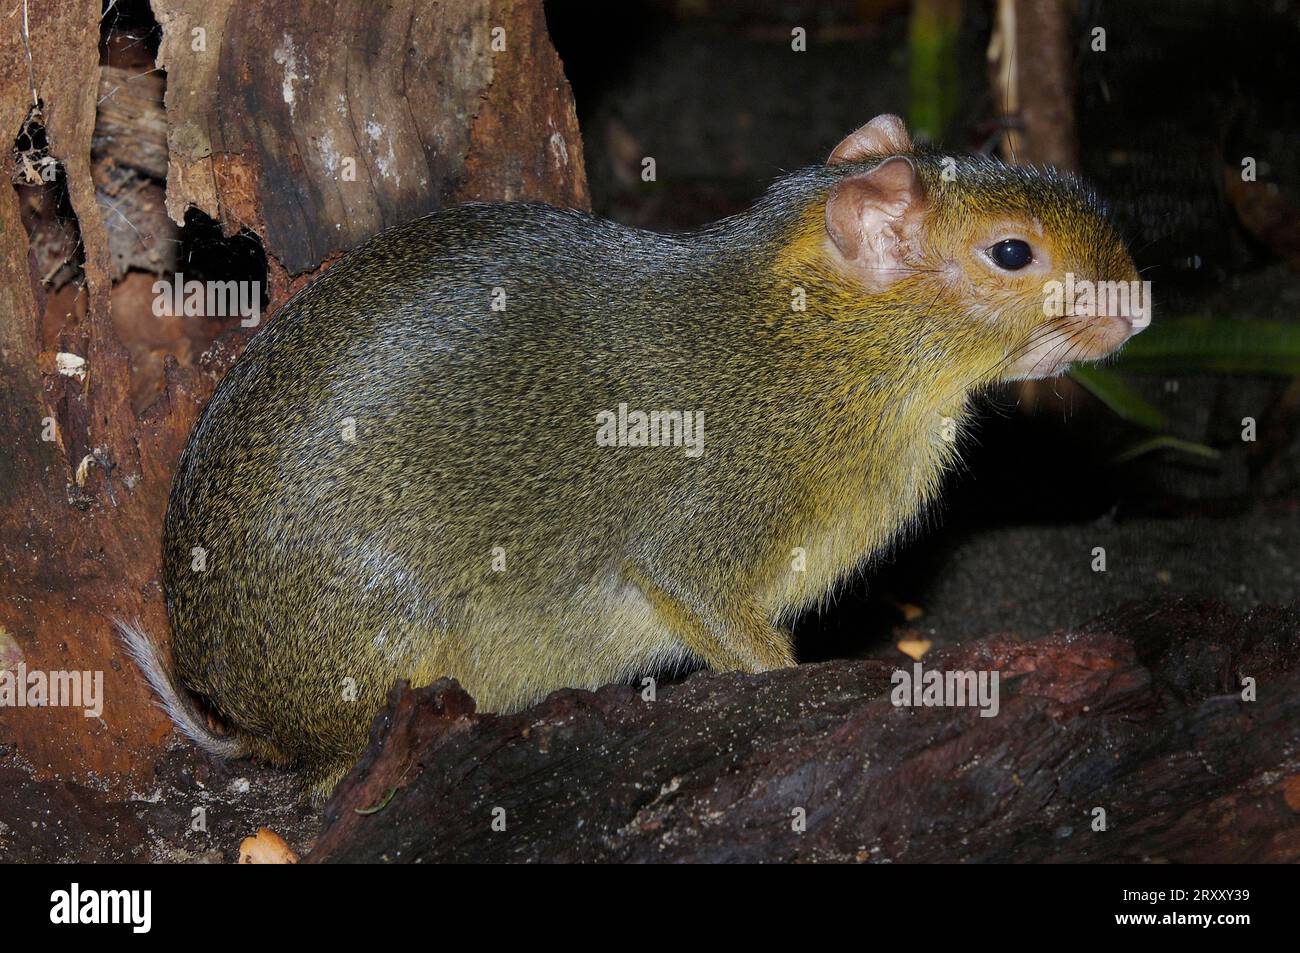 Acouchis (Myoprocta acouchy), Tails aguti, lateral, Side Stockfoto